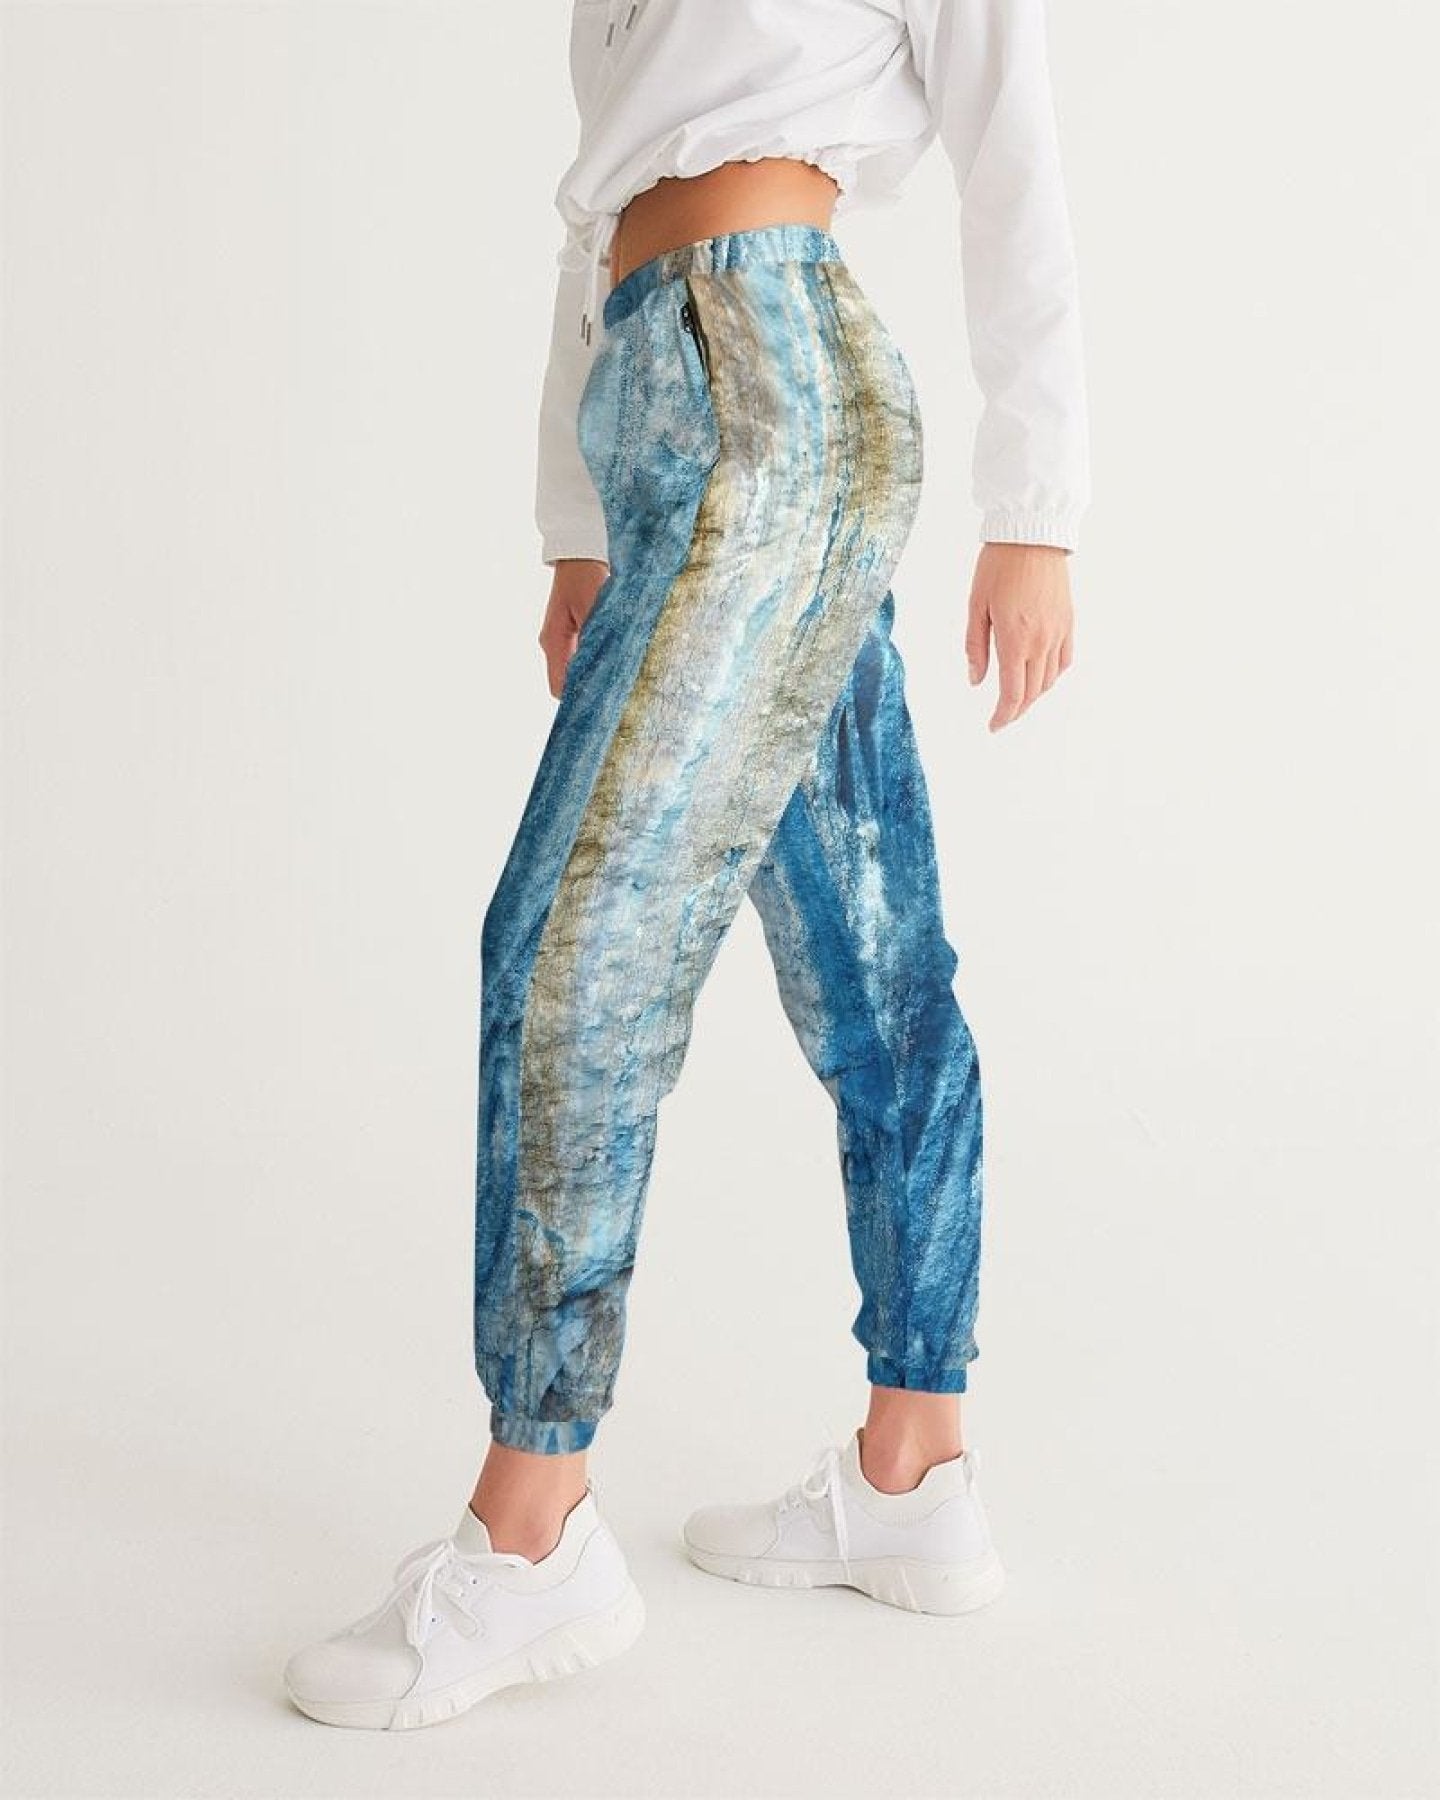 Elevate your style with comfortable and stylish women's track pants. Perfect for staying active and fashionable. Shop now!